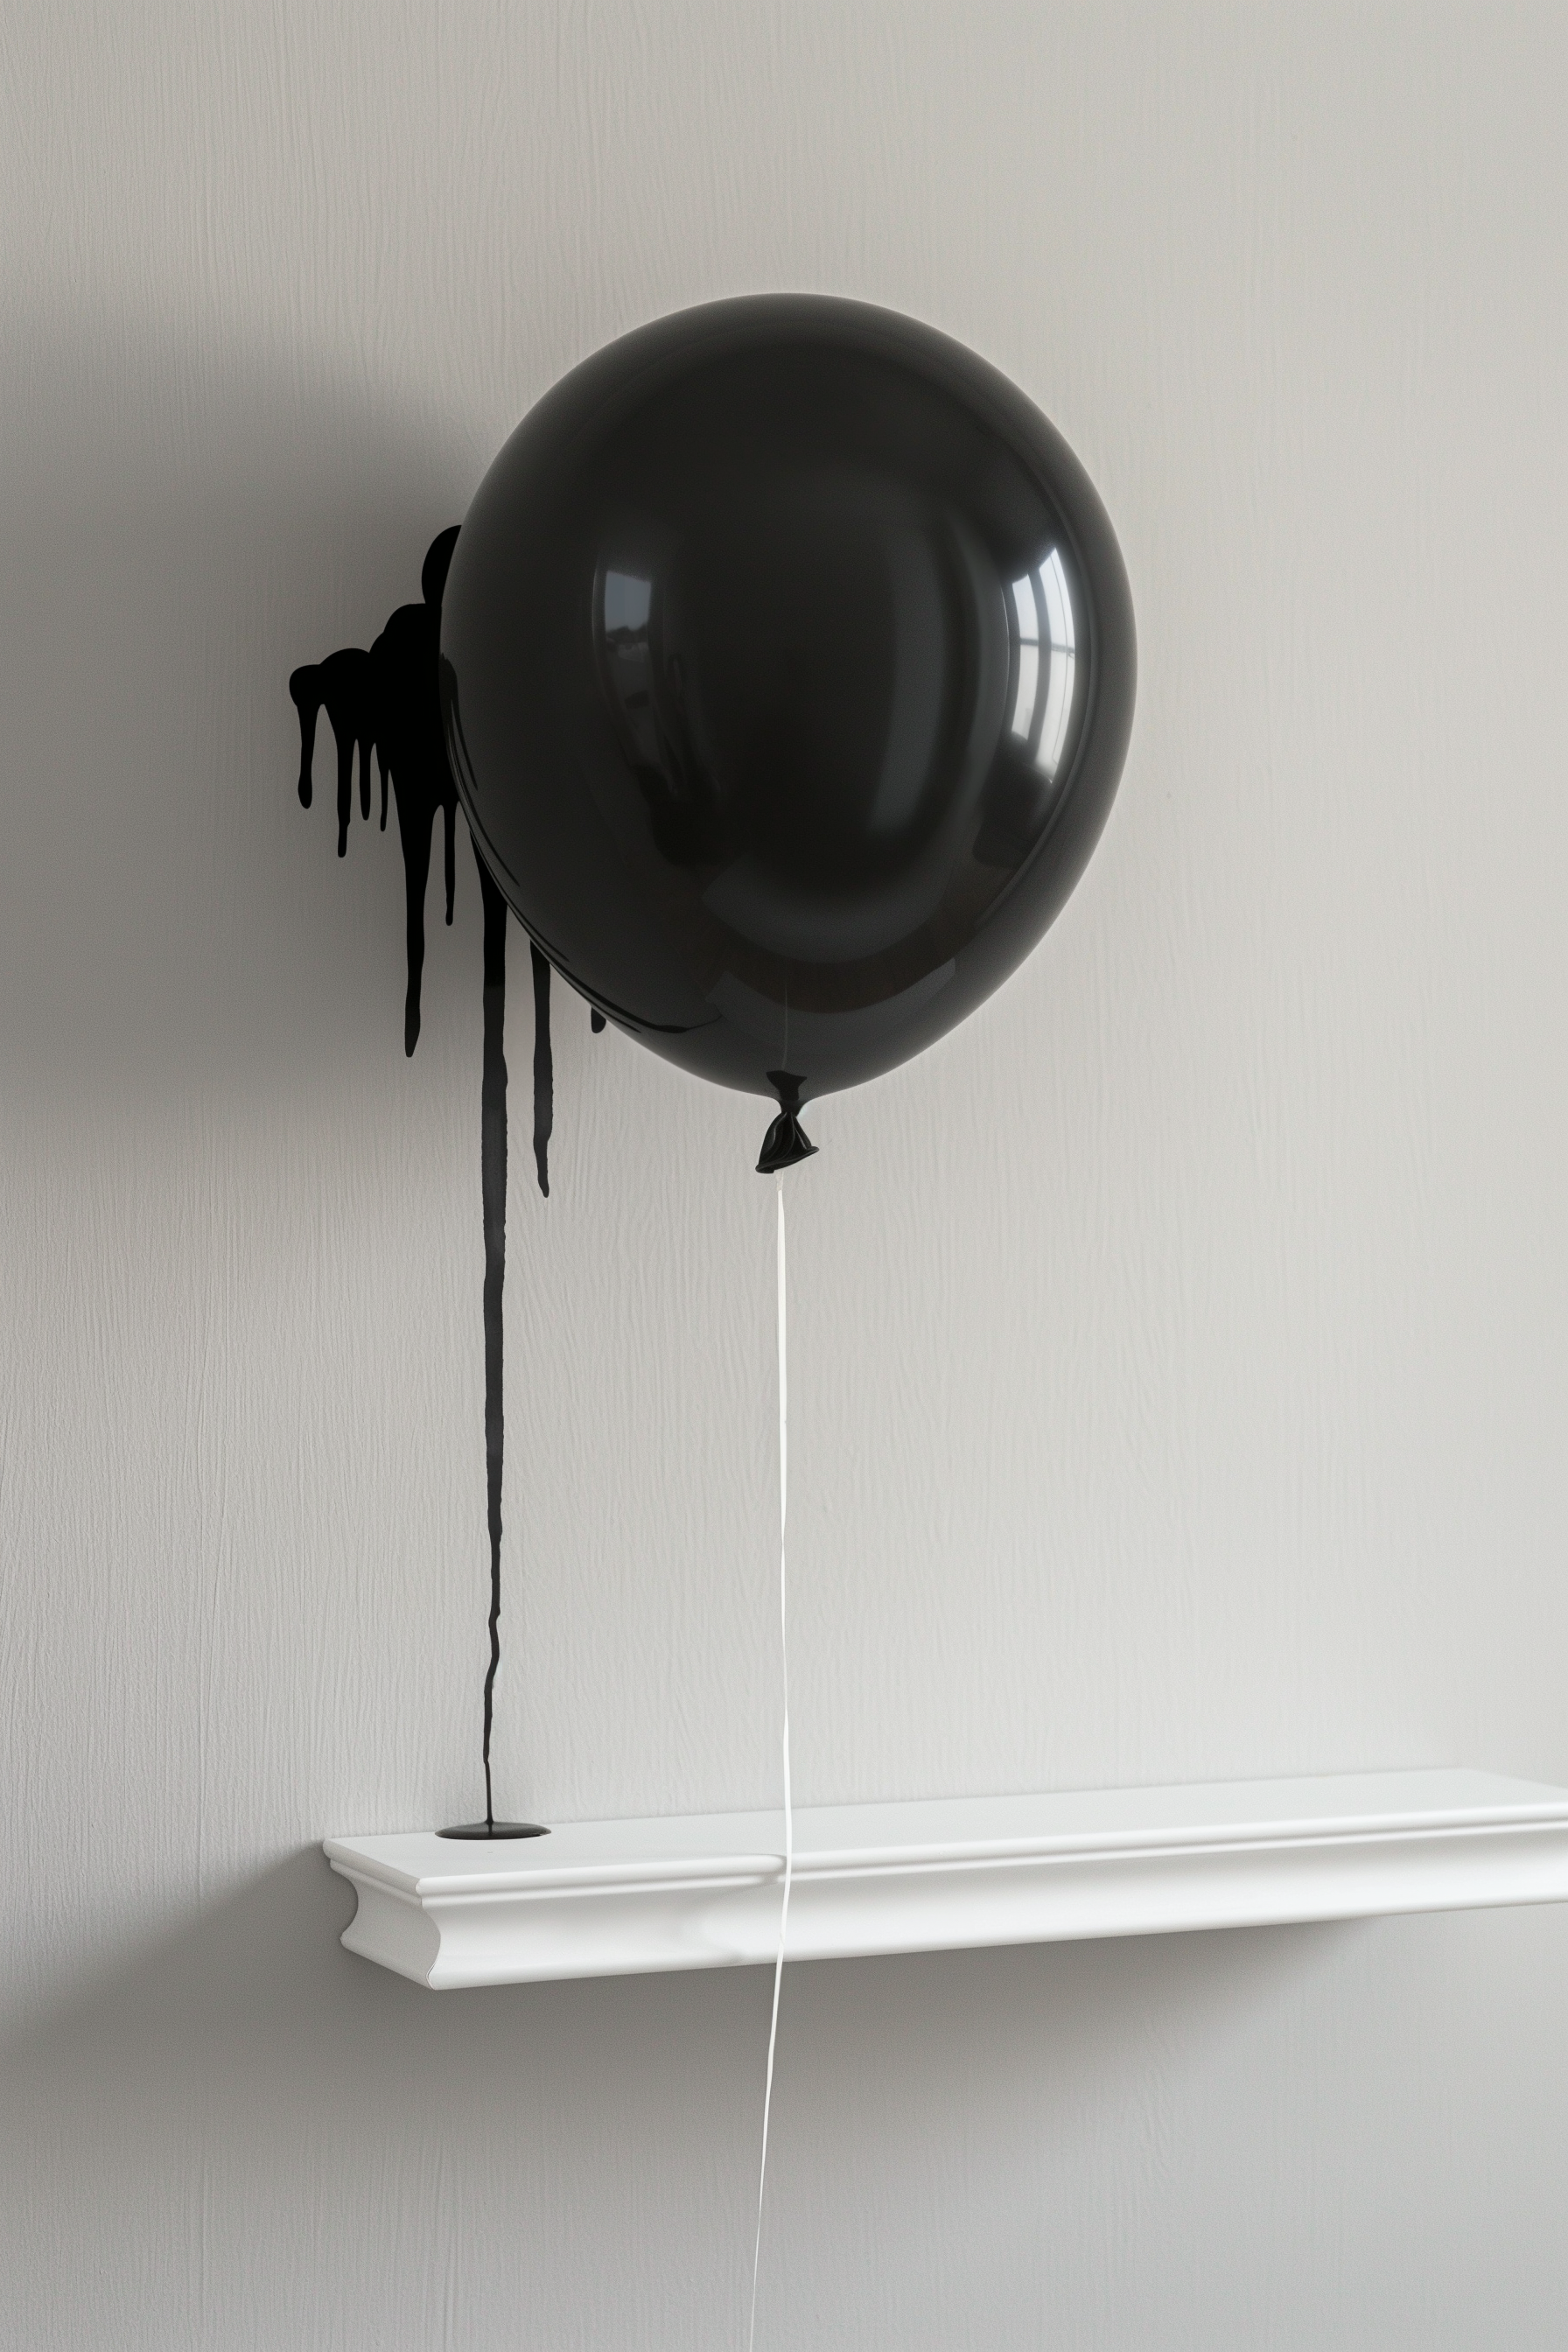 Black Balloon with Ink Spill